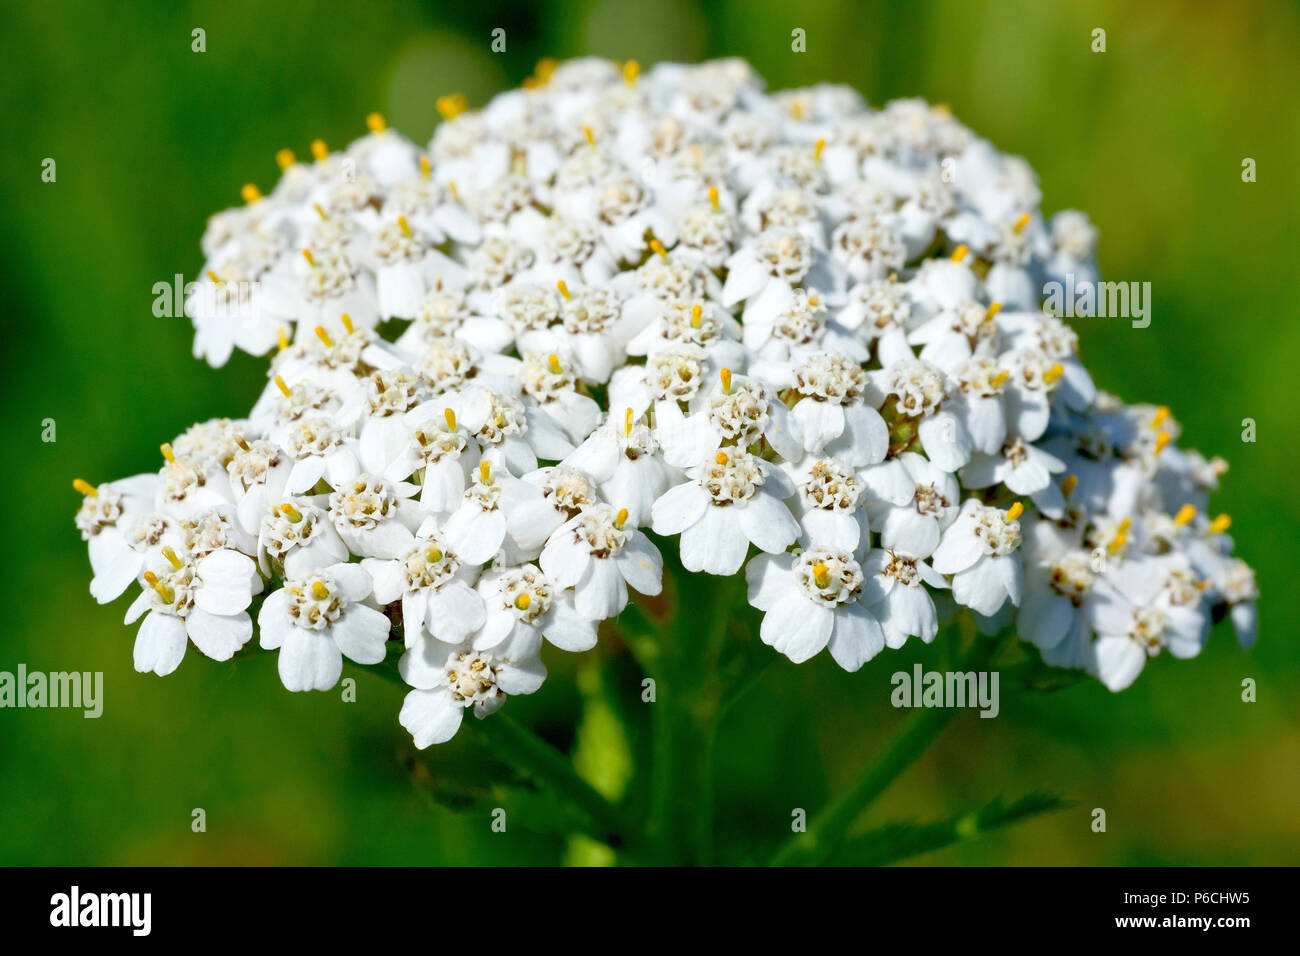 Yarrow (achillea millefolium), also known as Milfoil, close up of the more common white flower head showing detail. Stock Photo